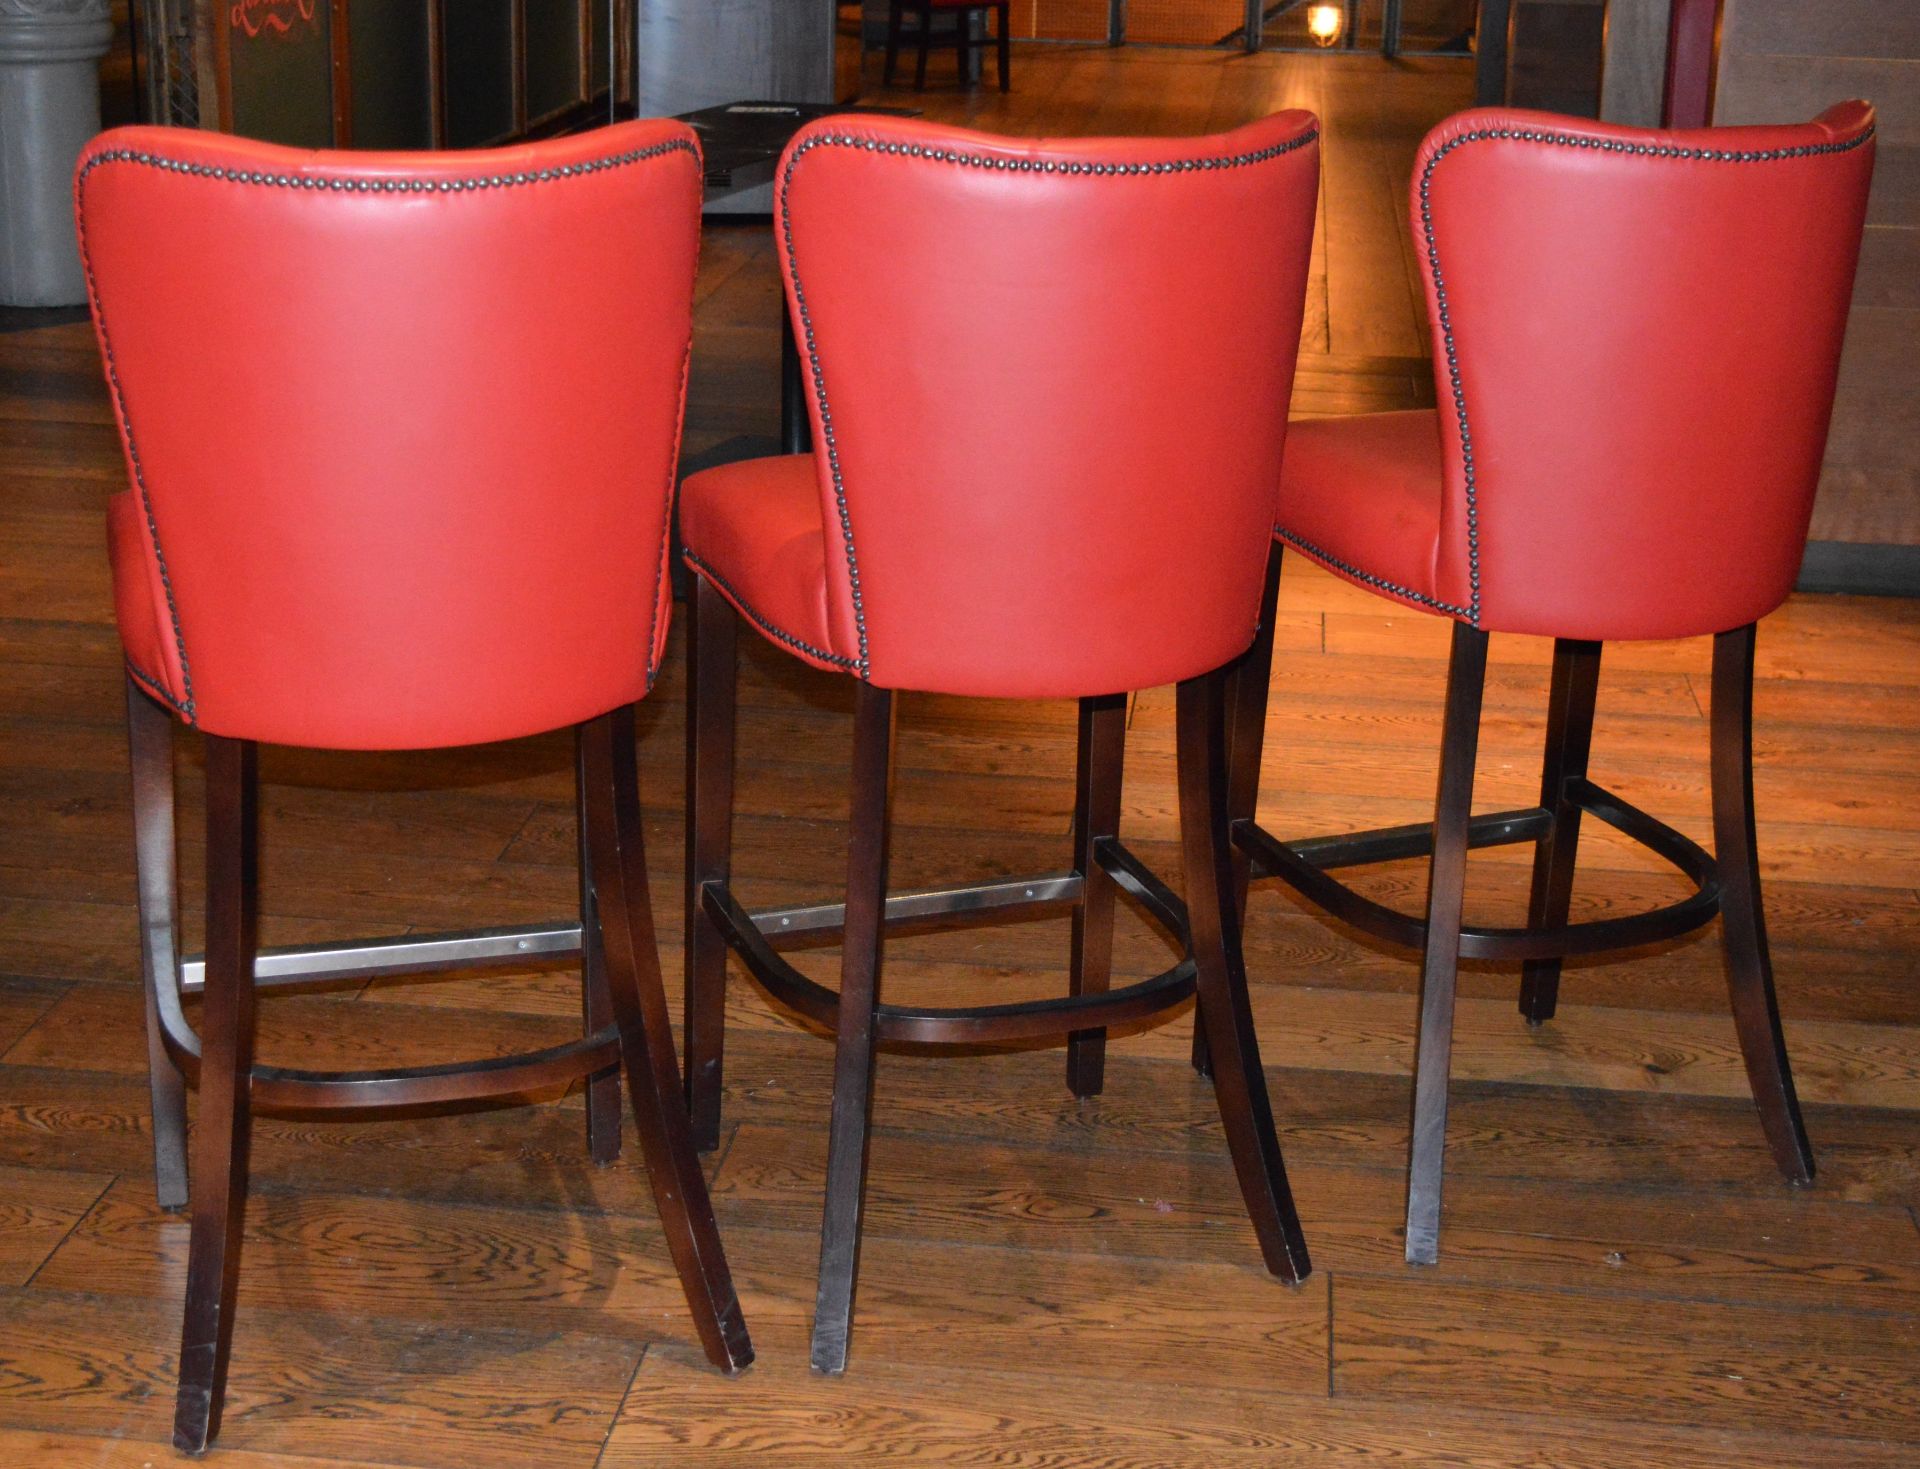 4 x Buttoned Back Bar Stools With Red Leather Upholstery - H113/76 x W49 x D50 cms - Image 6 of 6